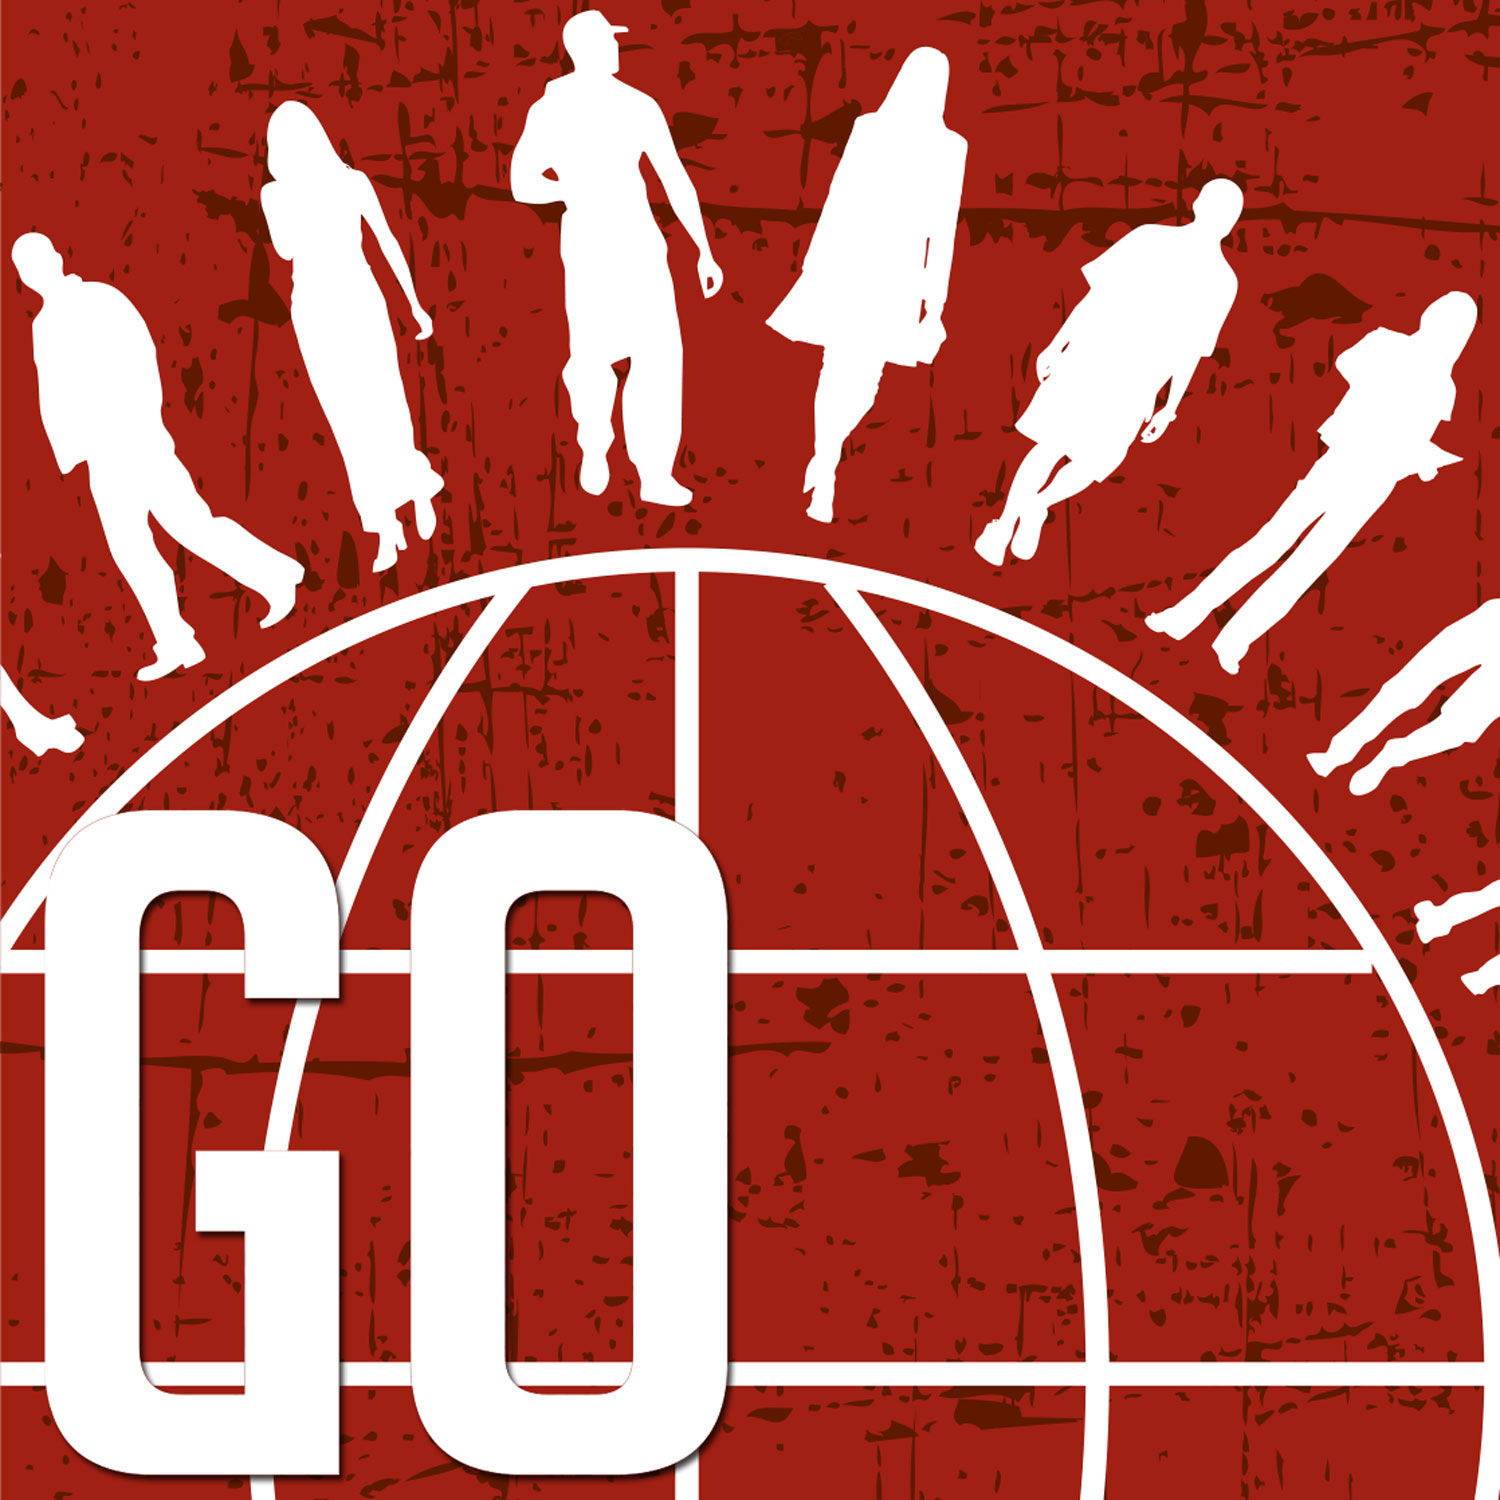 Our Commission: GO! God’s mission of global blessing